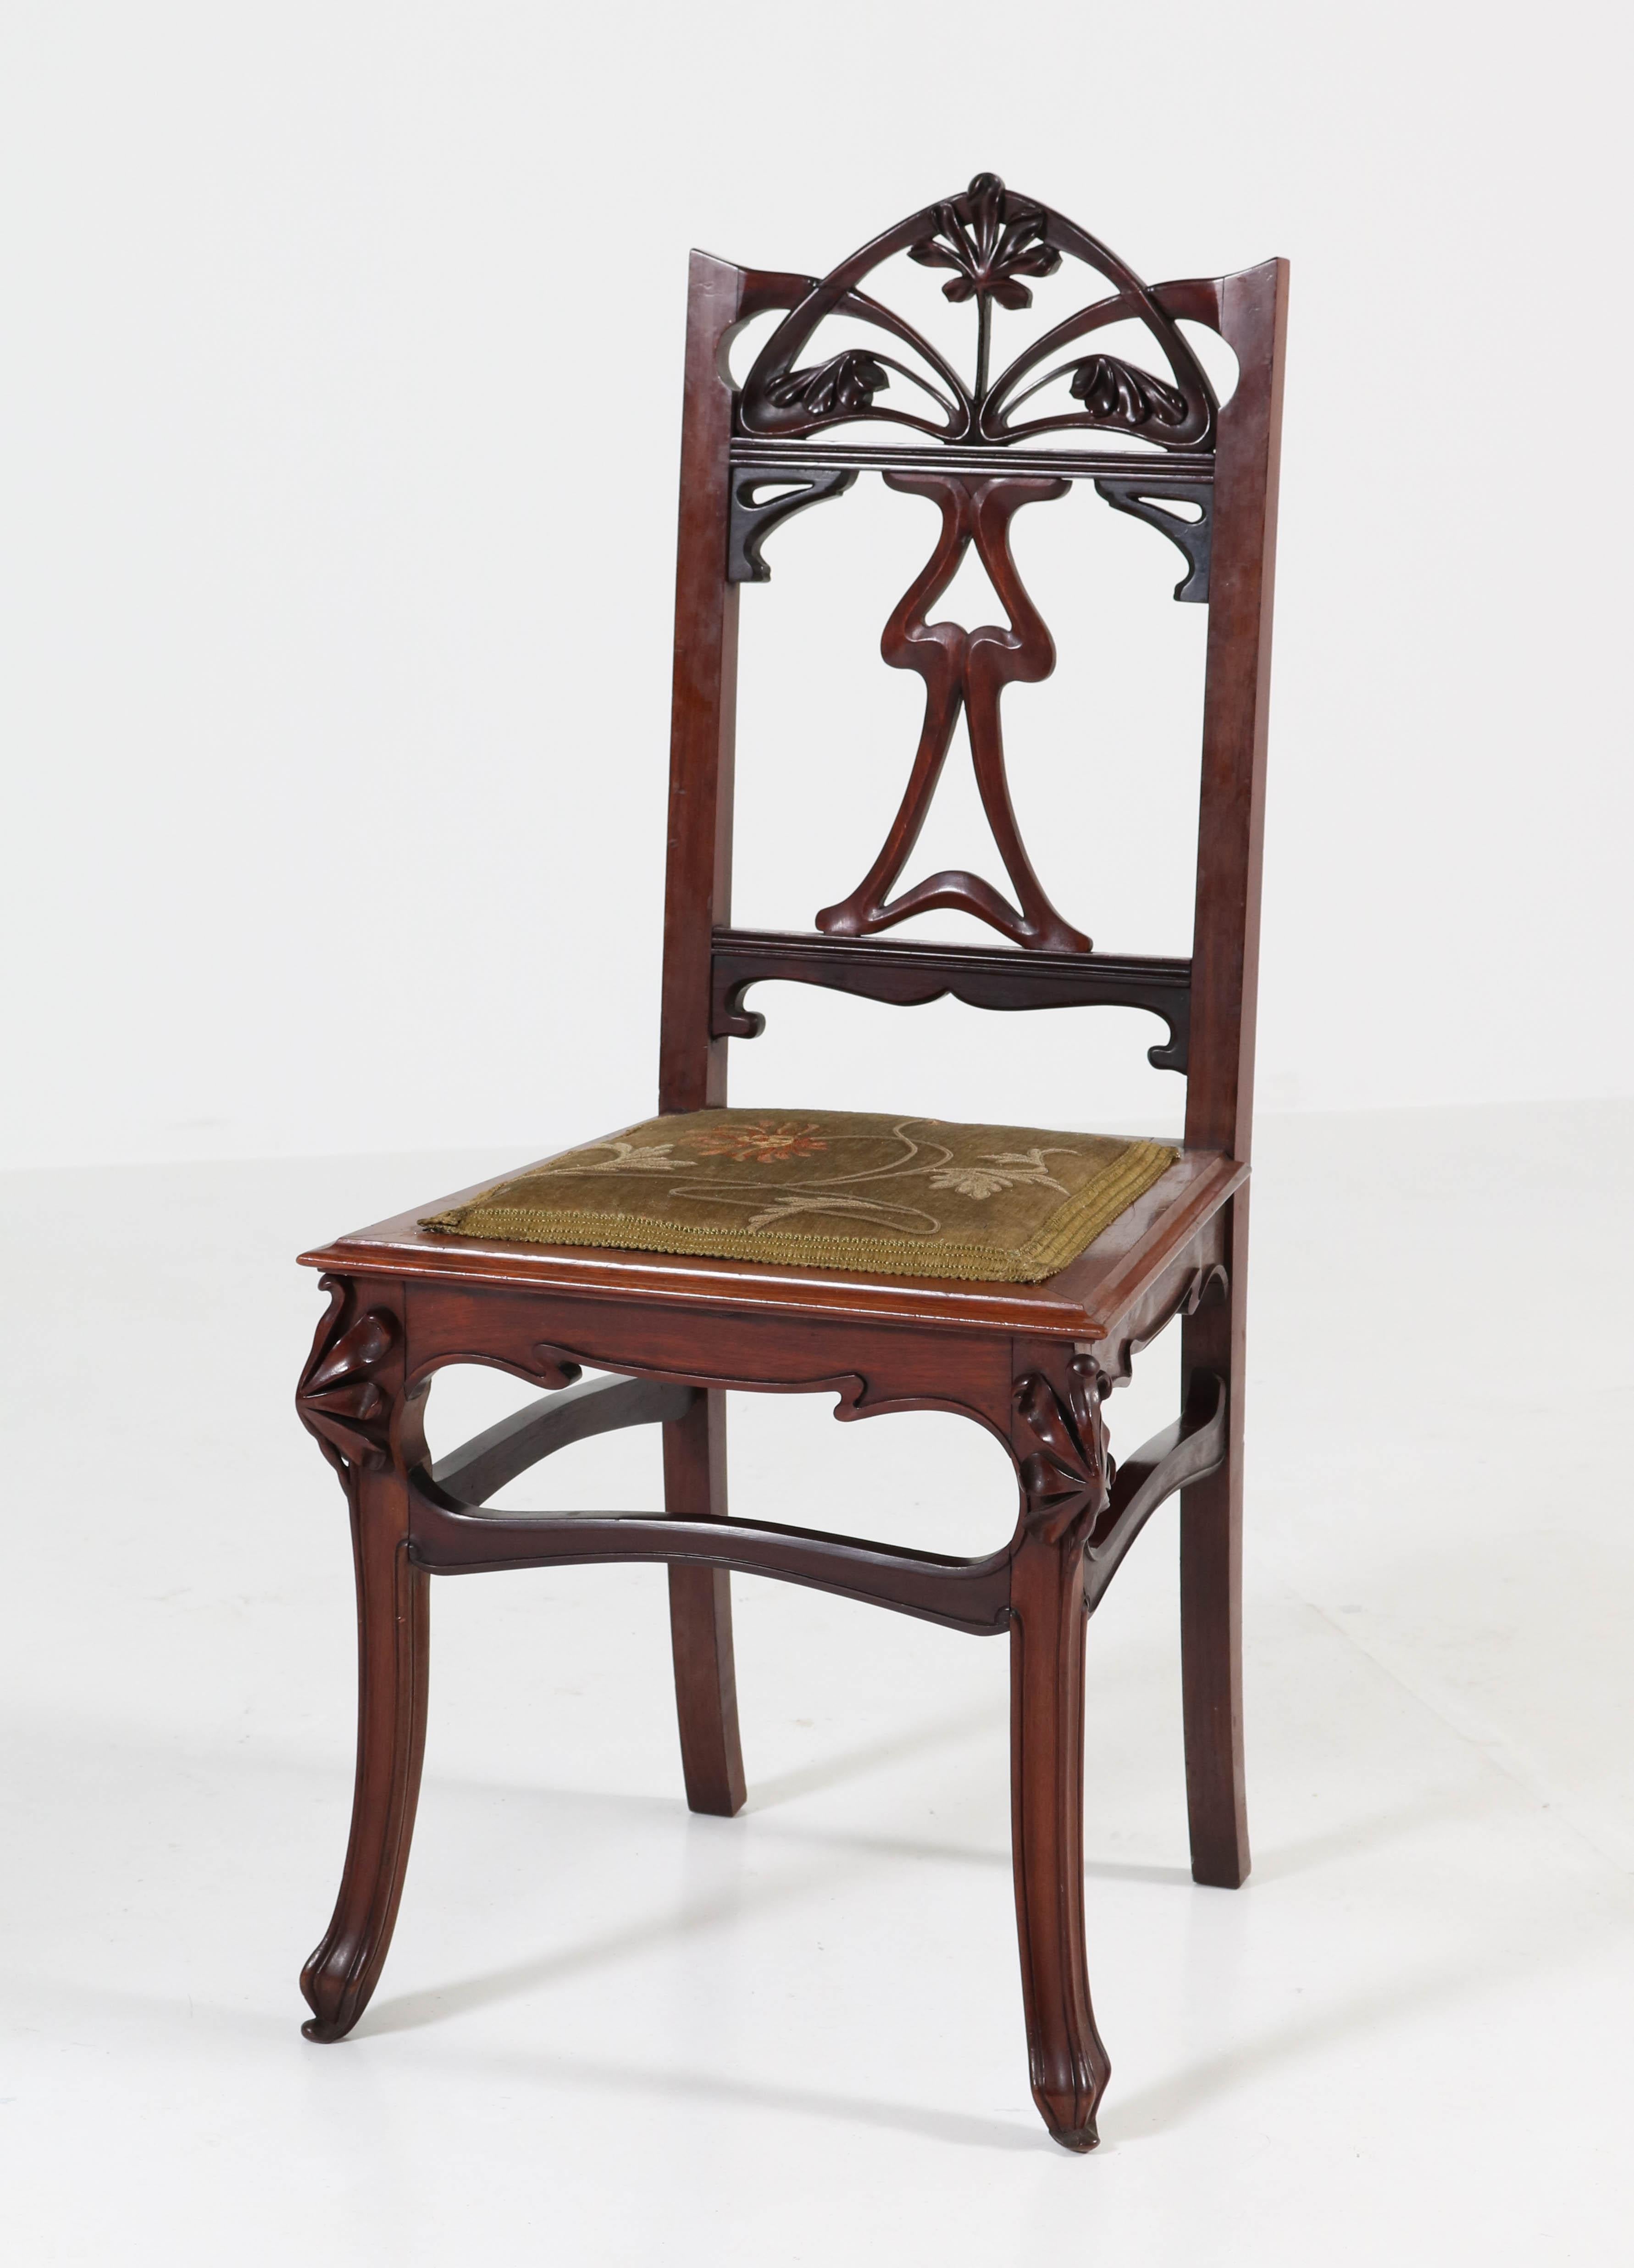 Offered by Amsterdam Modernism:
Wonderful and rare set of six Art Nouveau chairs.
Striking French design from the 1900s.
Solid mahogany with original velvet floral upholstery.
In good original condition with minor wear consistent with age and